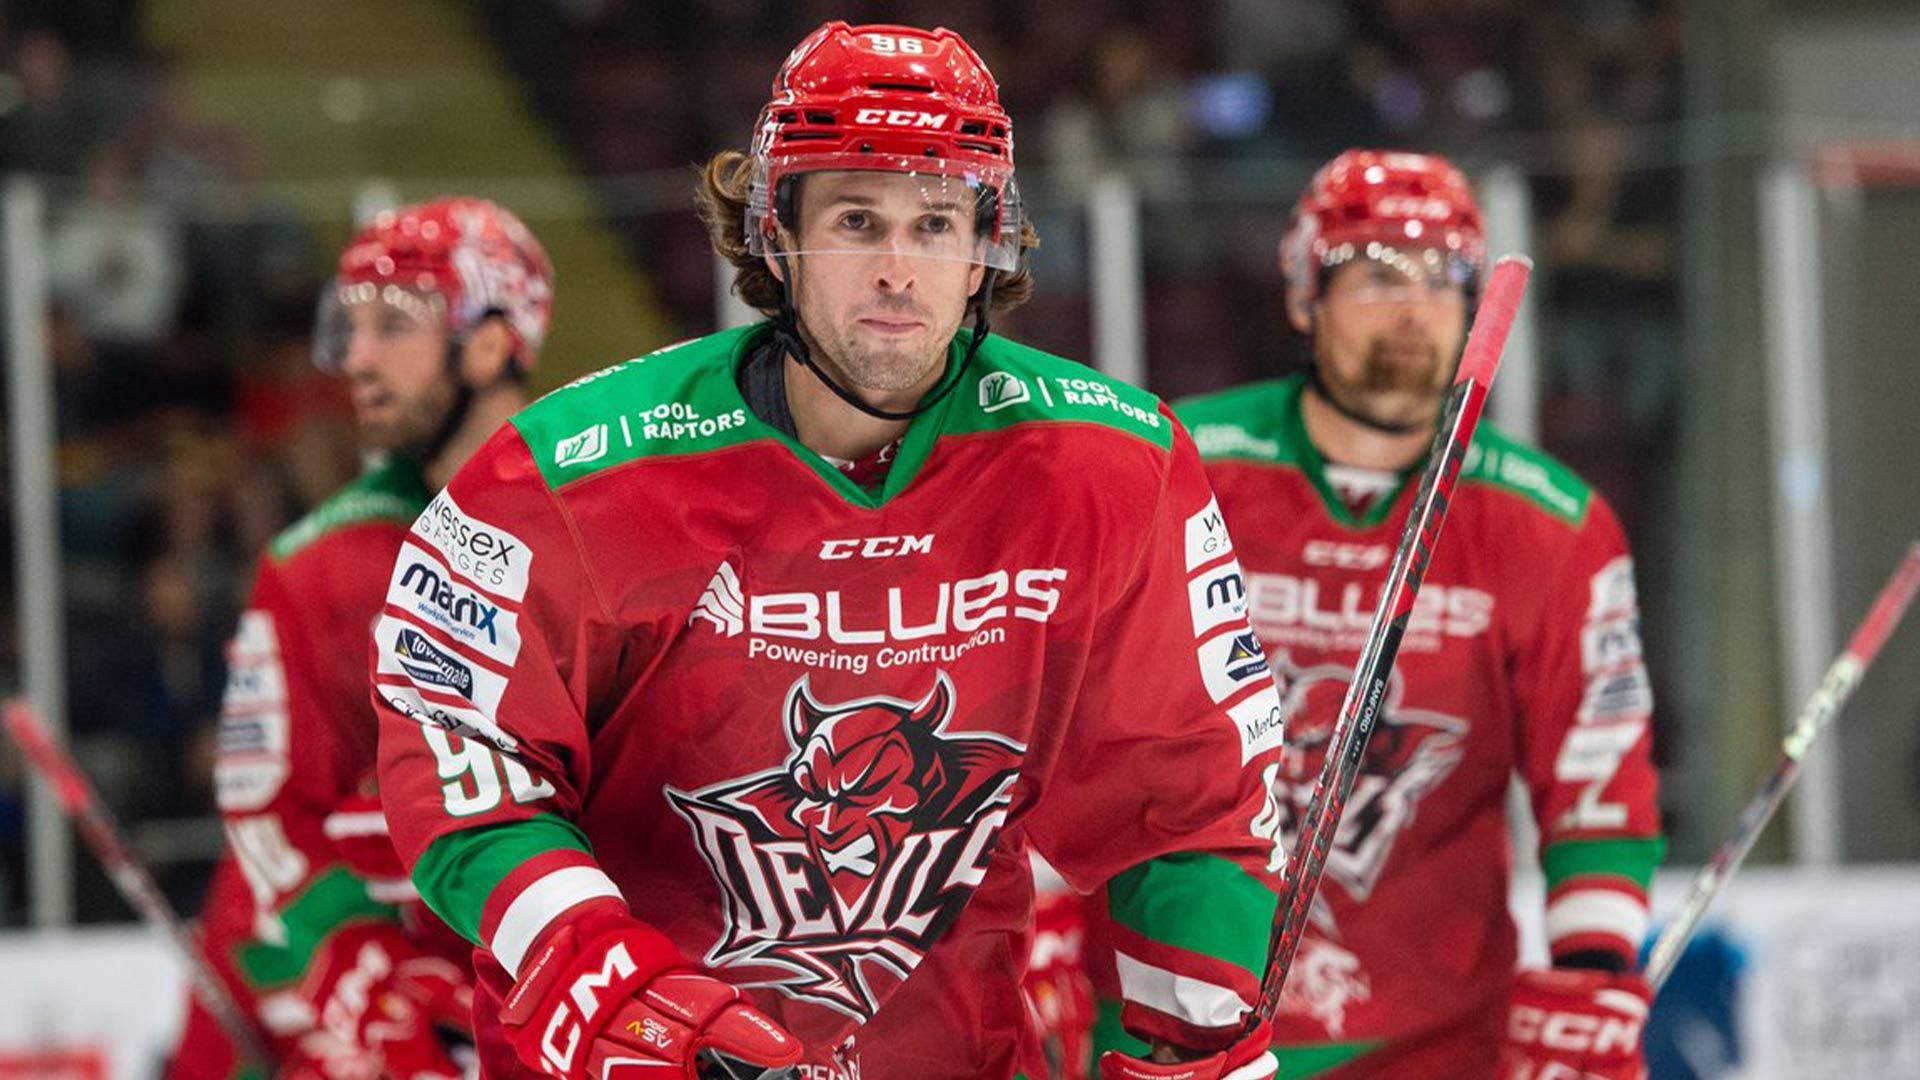 Devils v Panthers tickets are selling fast :: Cardiff Devils